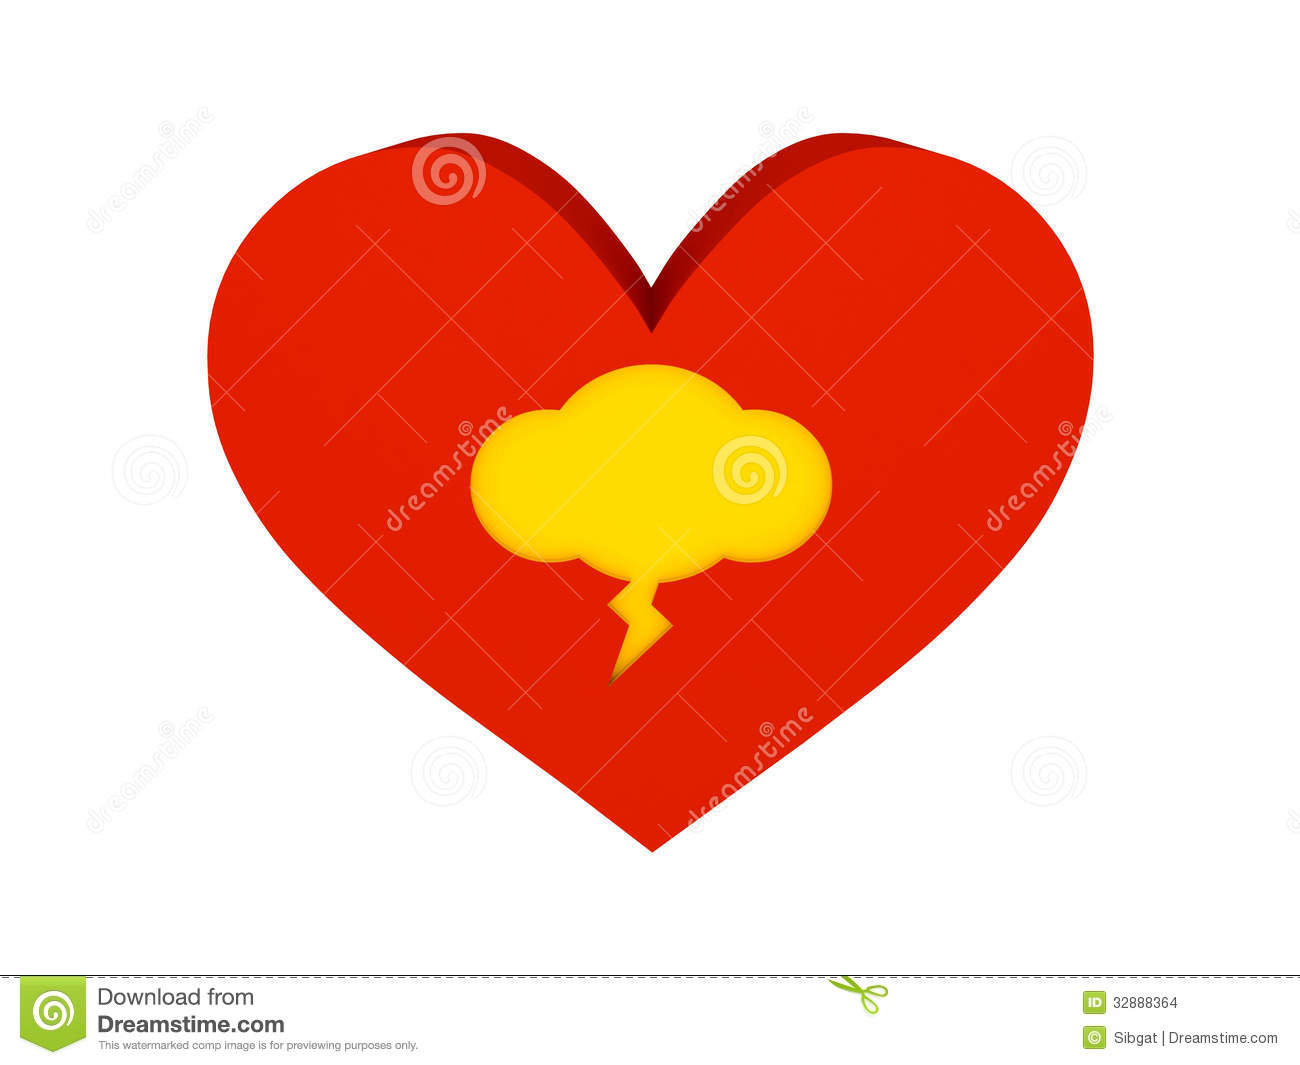 Big Red Heart With Thunder Cloud Symbol  Stock Images   Image